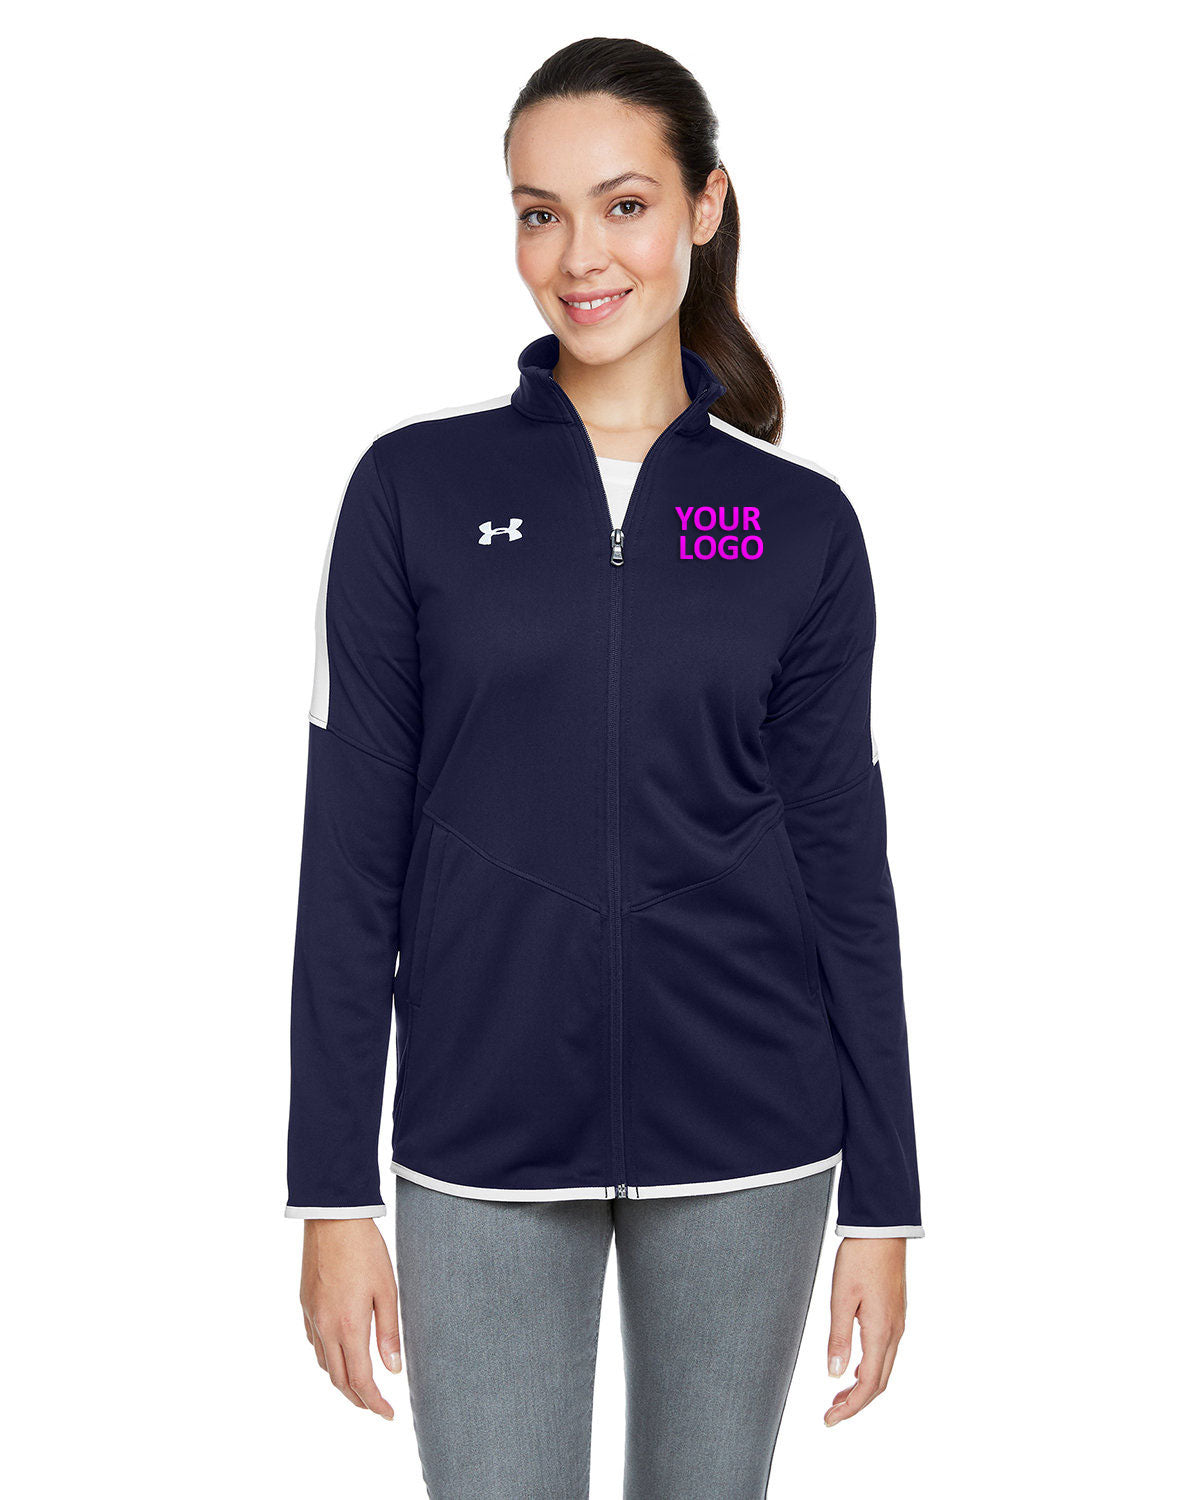 embroidered jackets for business Under Armour MIDNGHT NVY 410 1326774